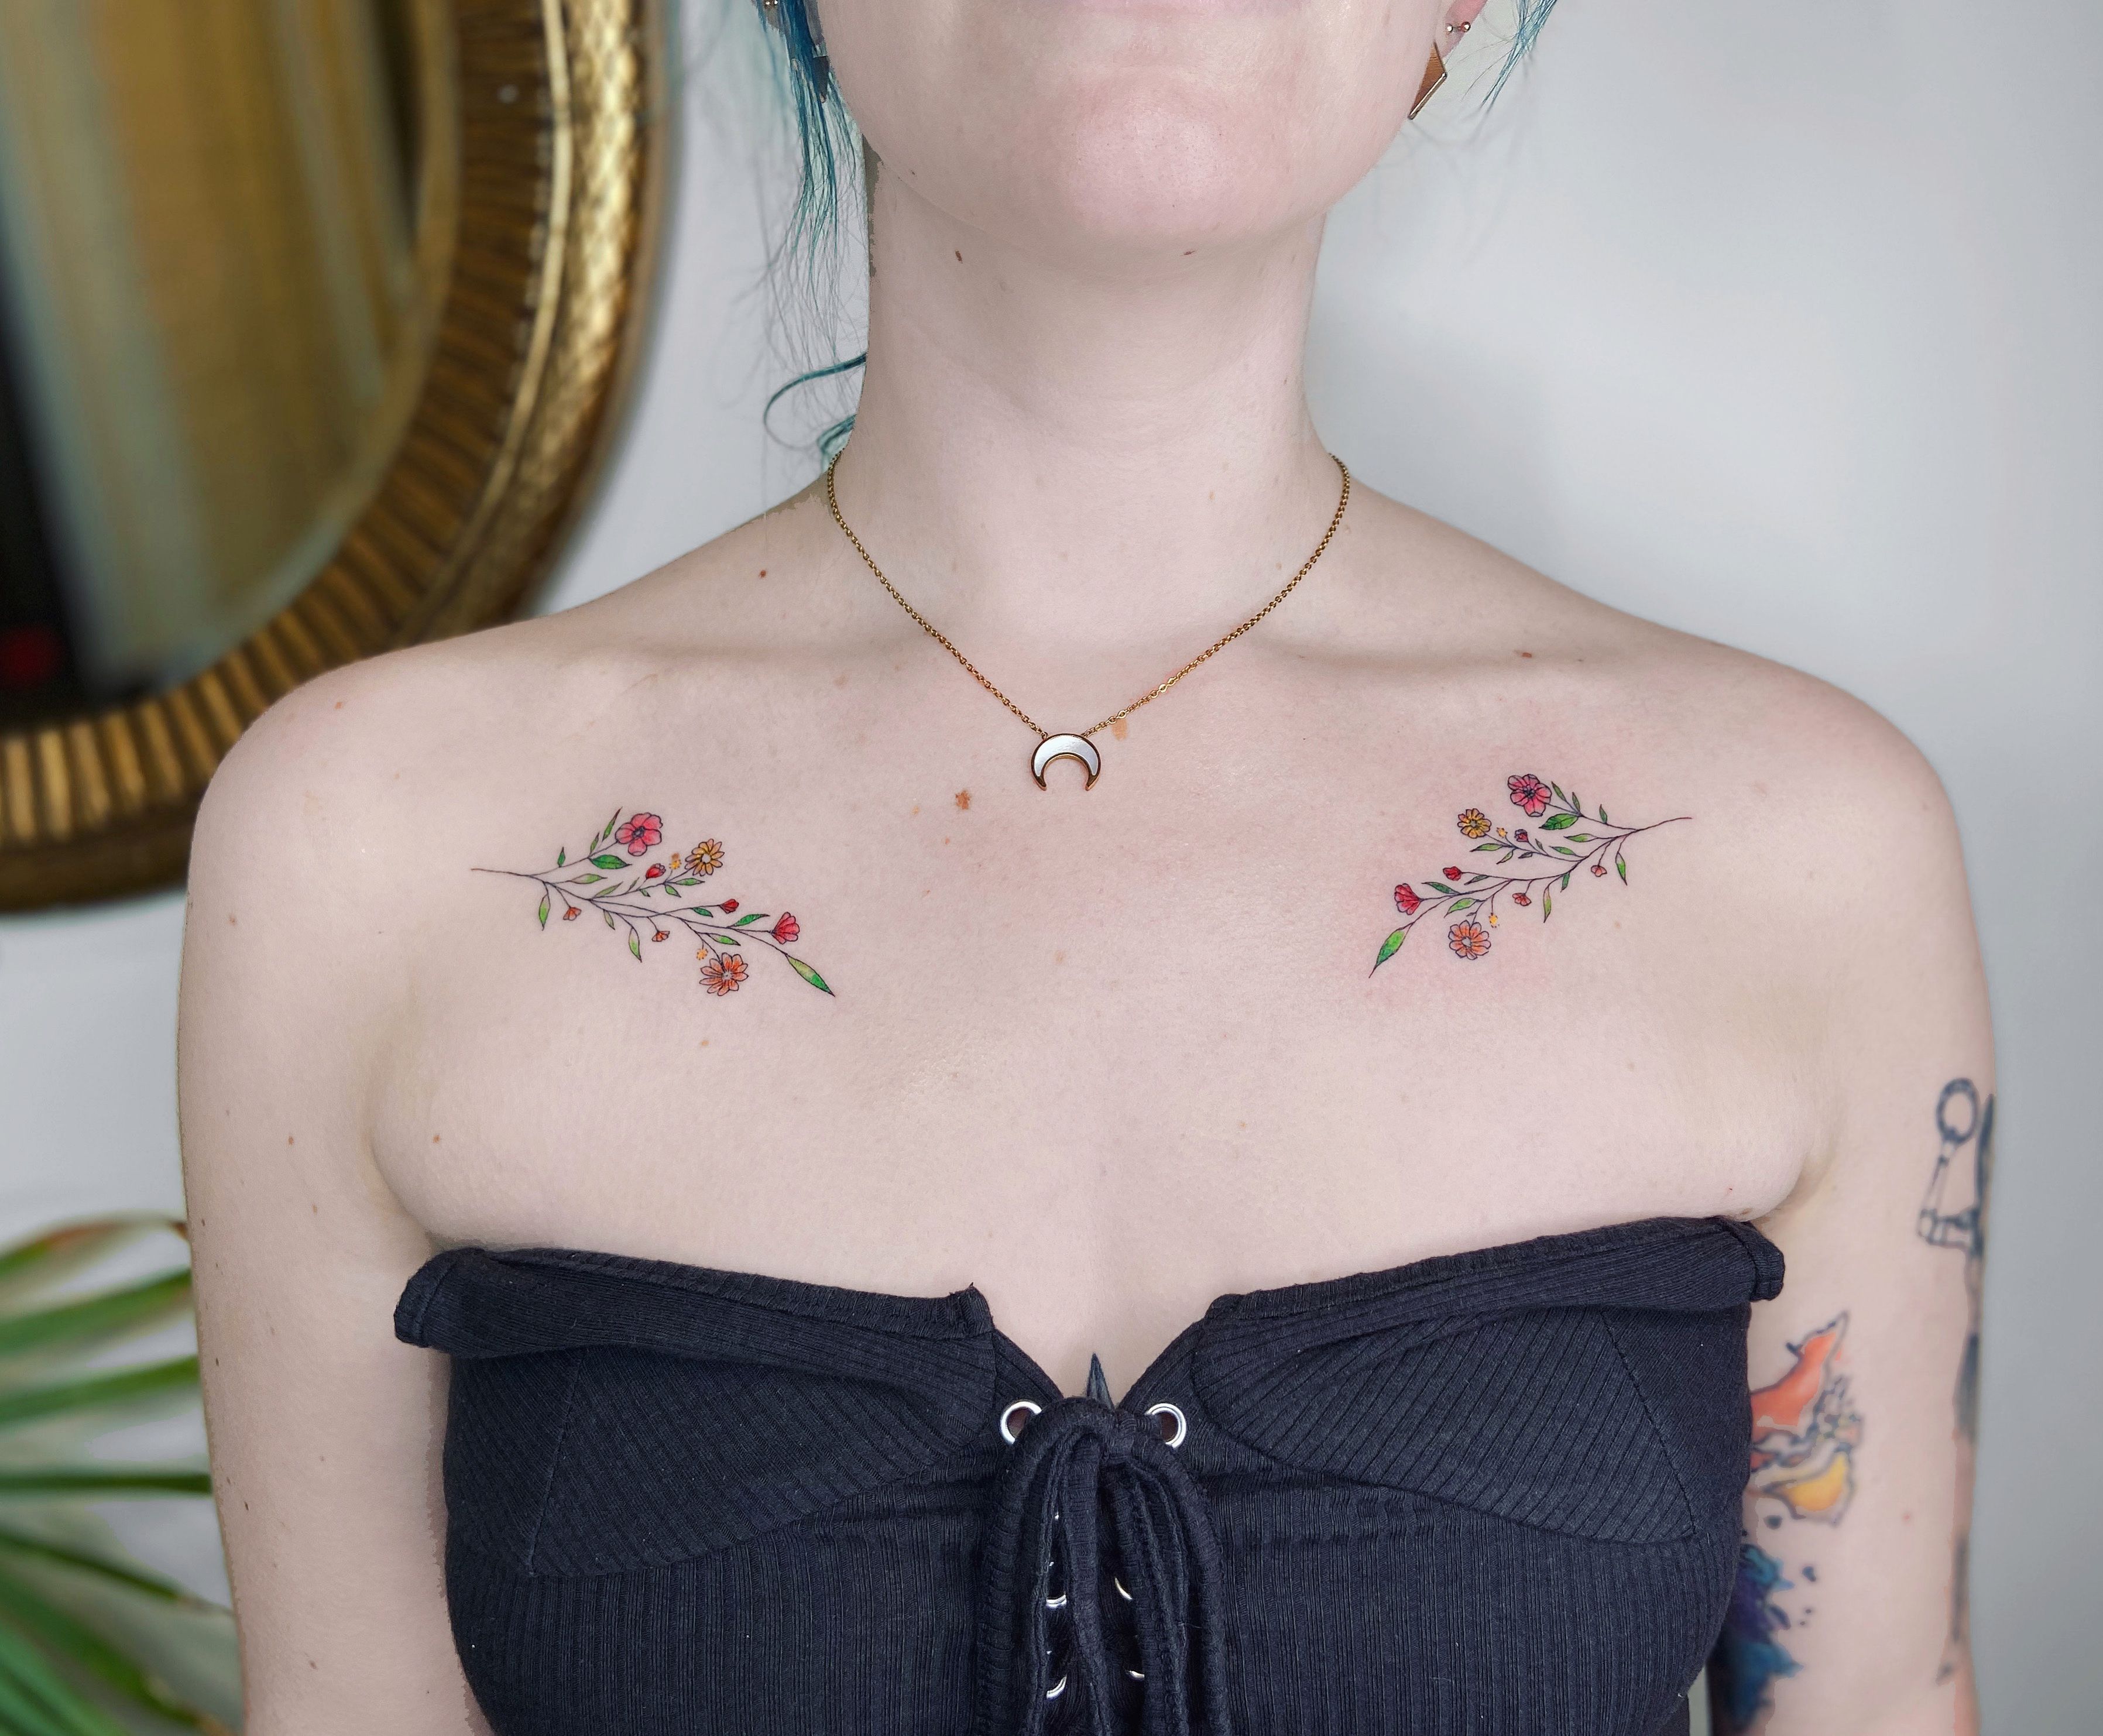 How To Make The Most Of A Collarbone Tattoo - Cultura Colectiva